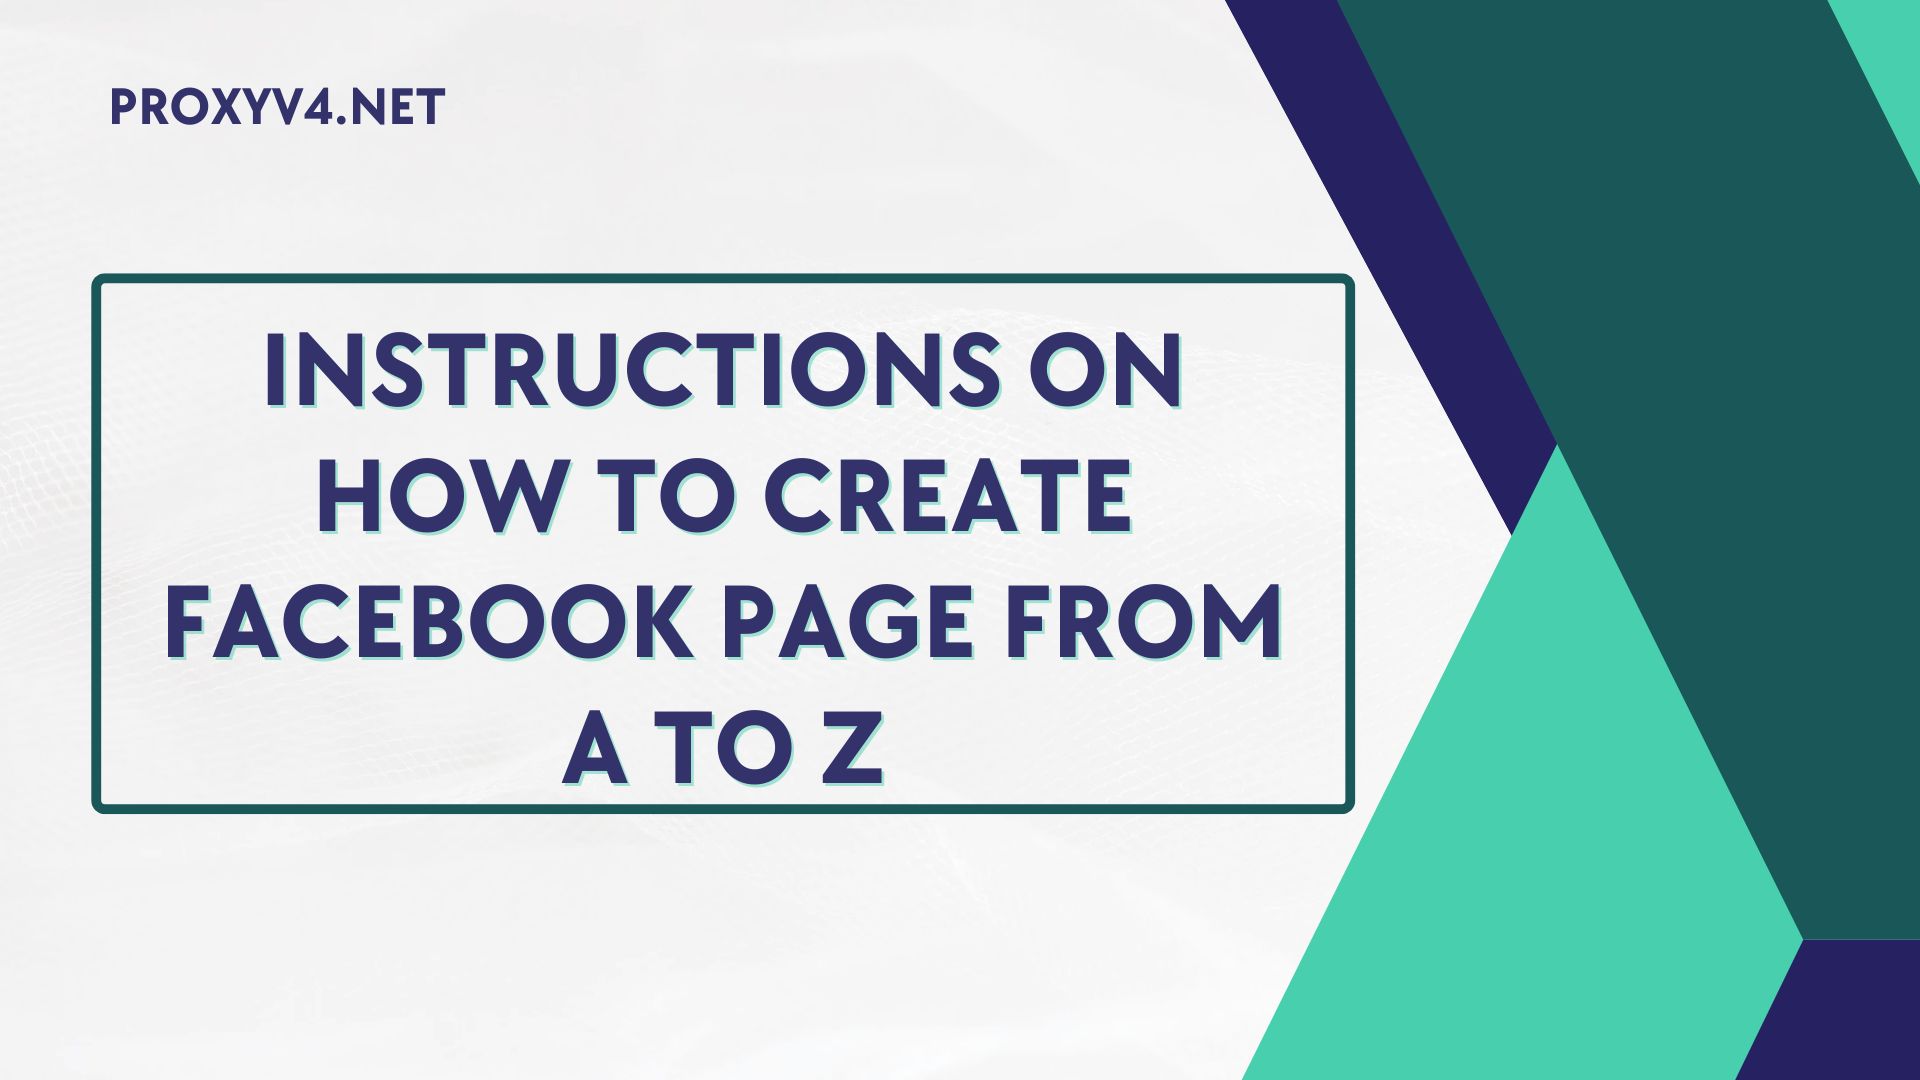 Instructions on how to create Facebook page from A to Z